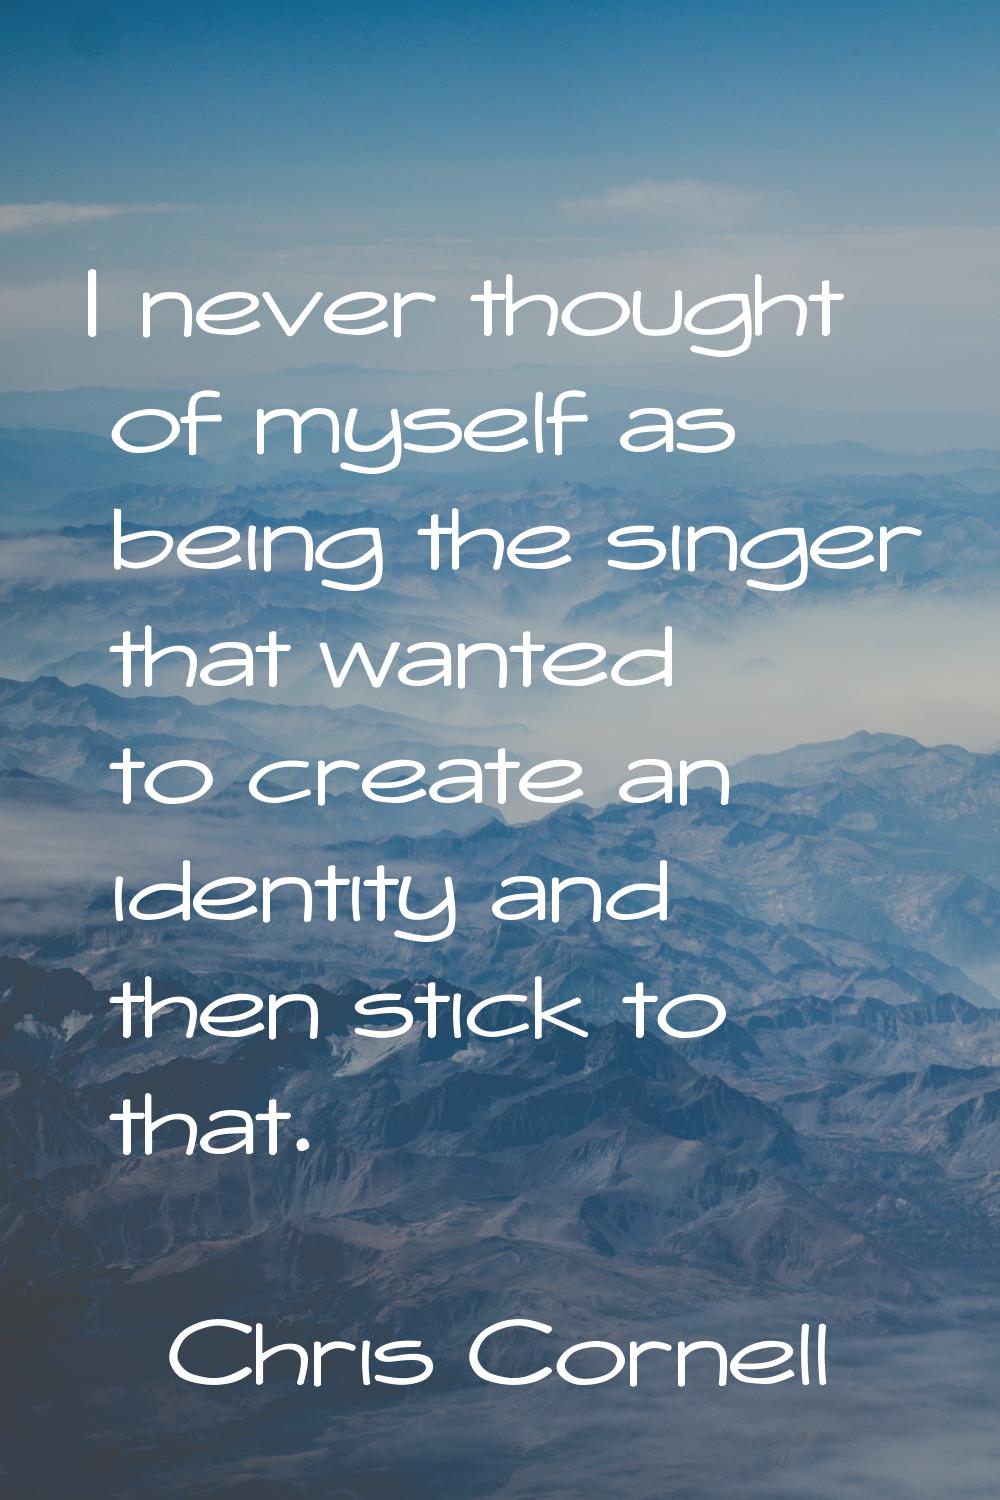 I never thought of myself as being the singer that wanted to create an identity and then stick to t